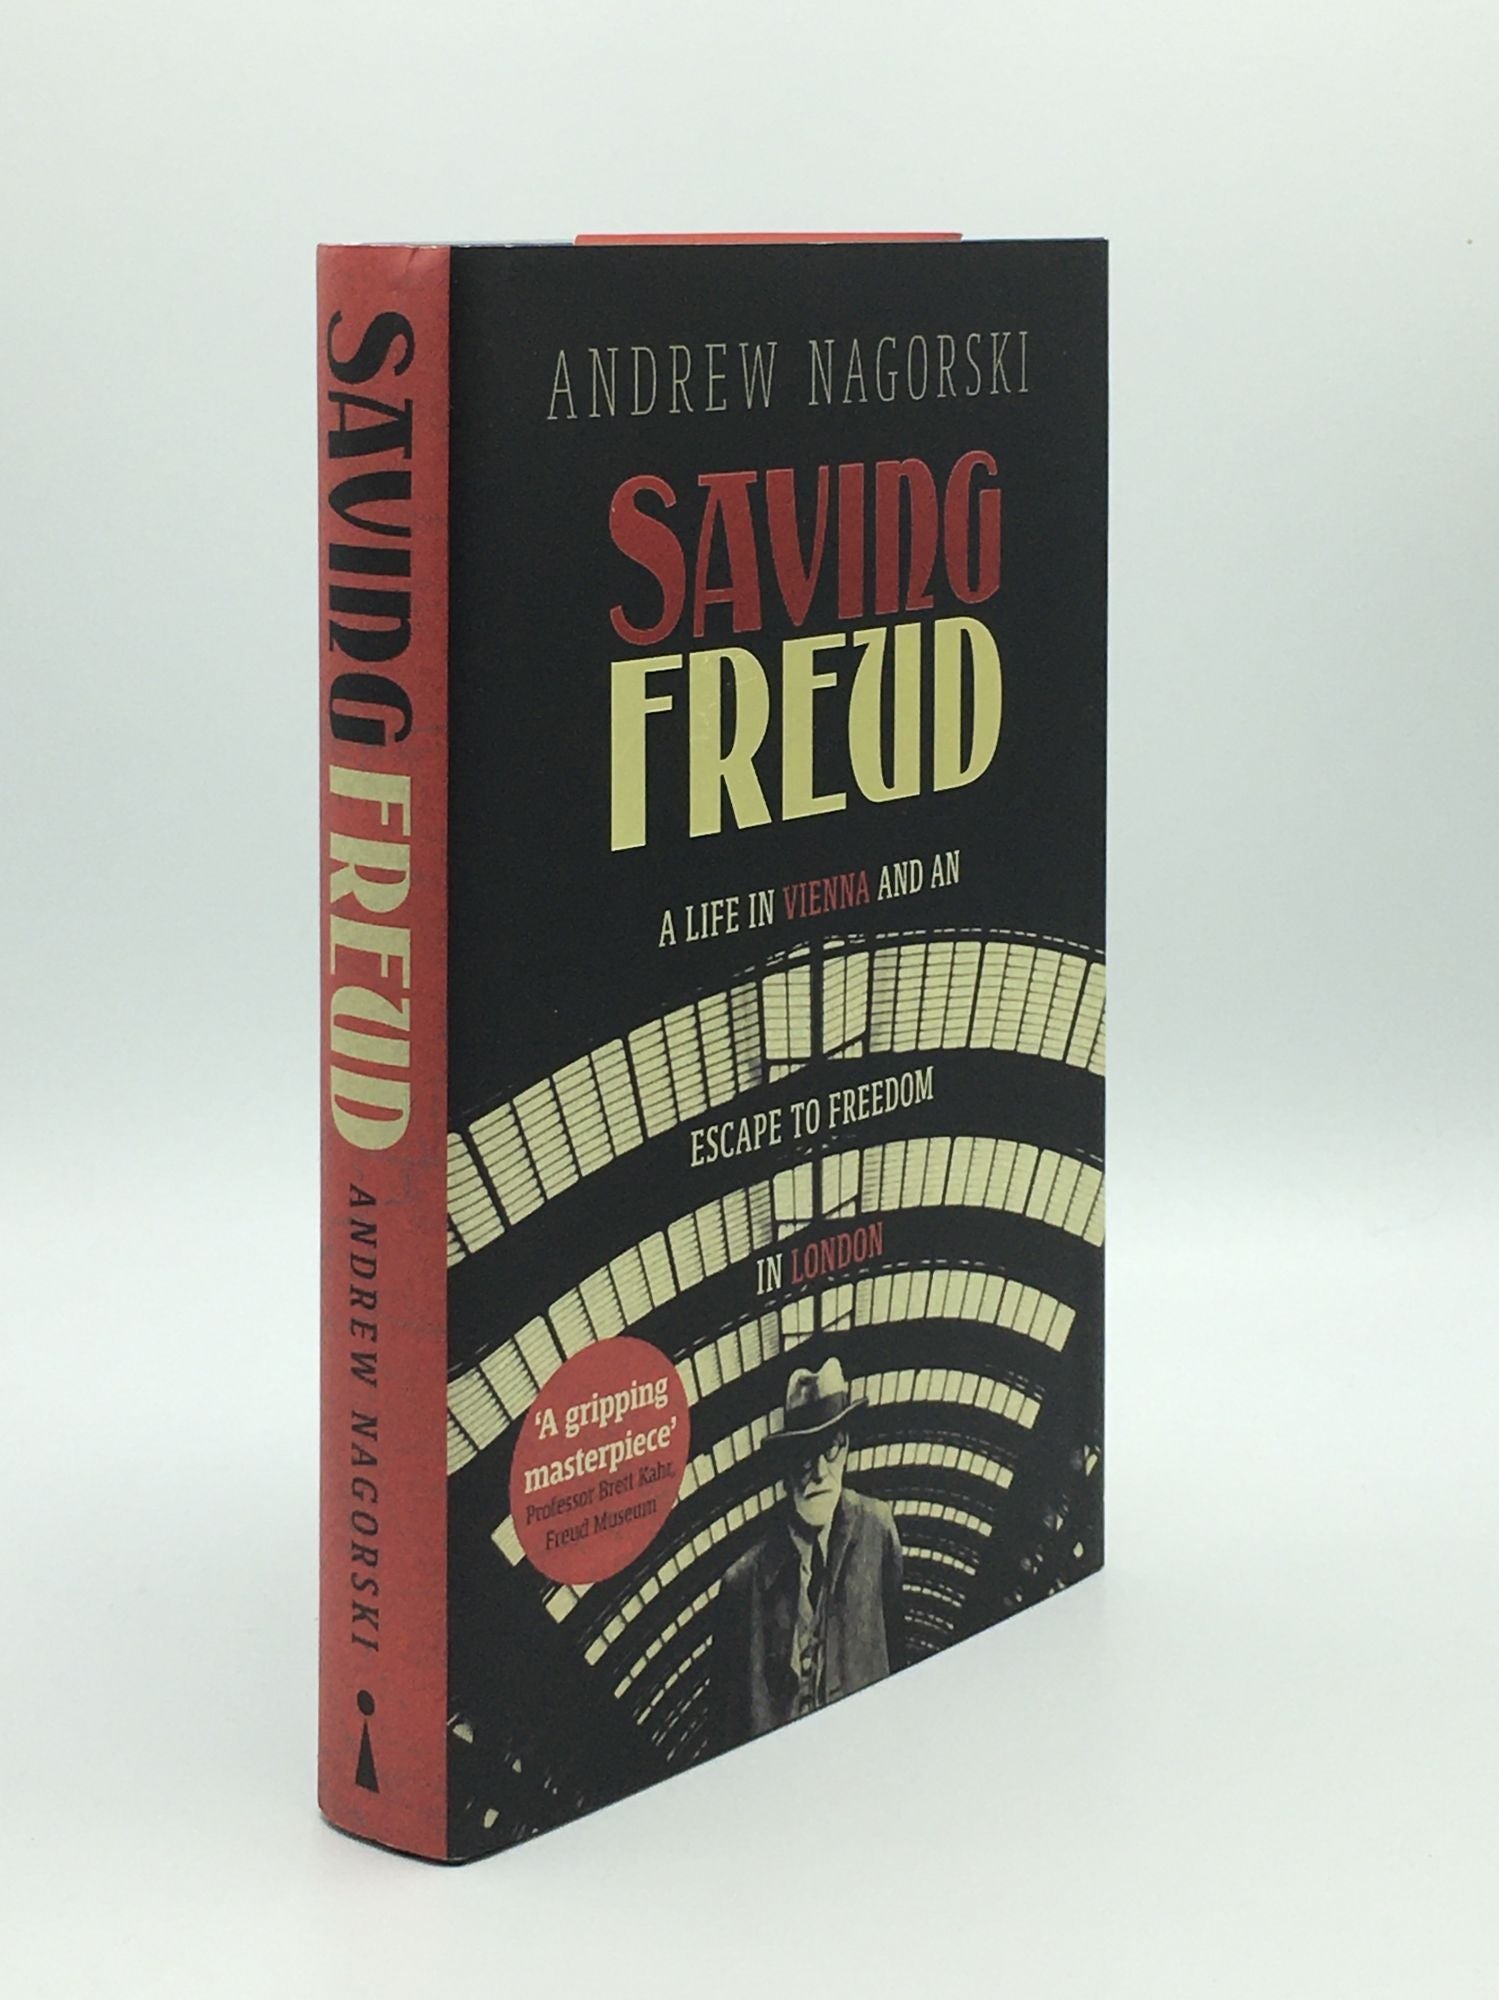 NAGORSKI Andrew - Saving Freud a Life in Vienna and an Escape to Freedom in Vienna